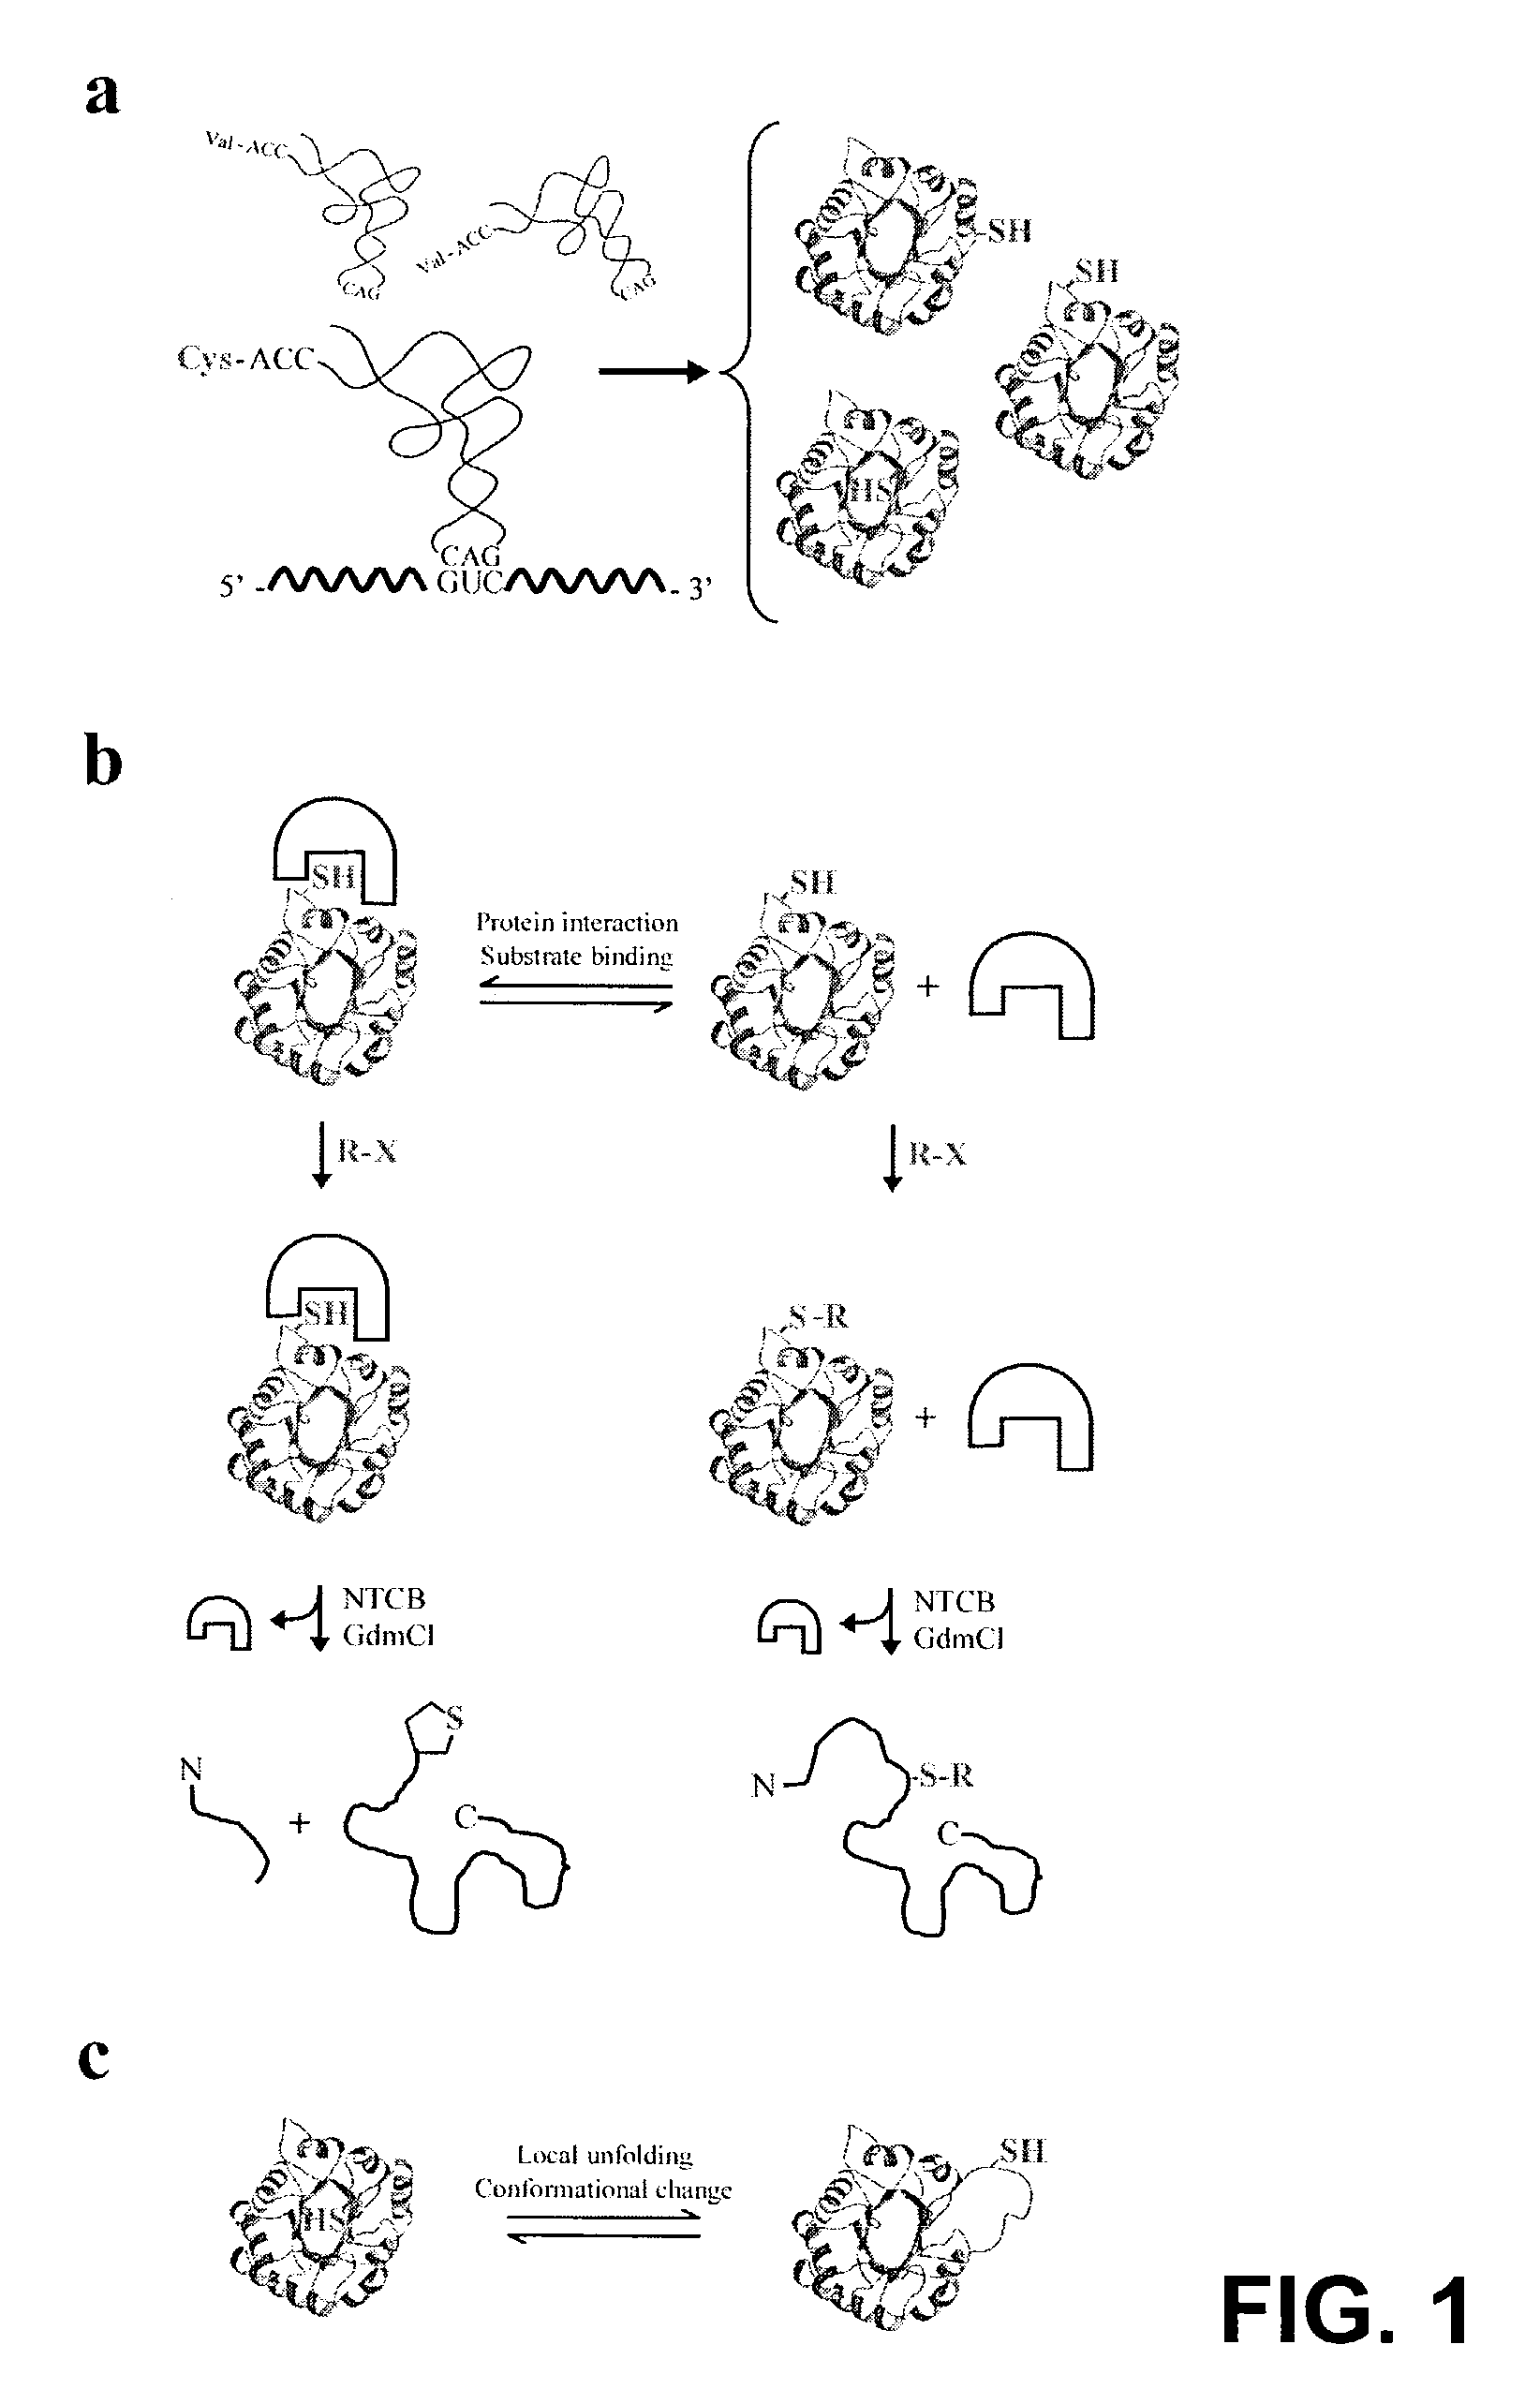 Methods for structural analysis of proteins